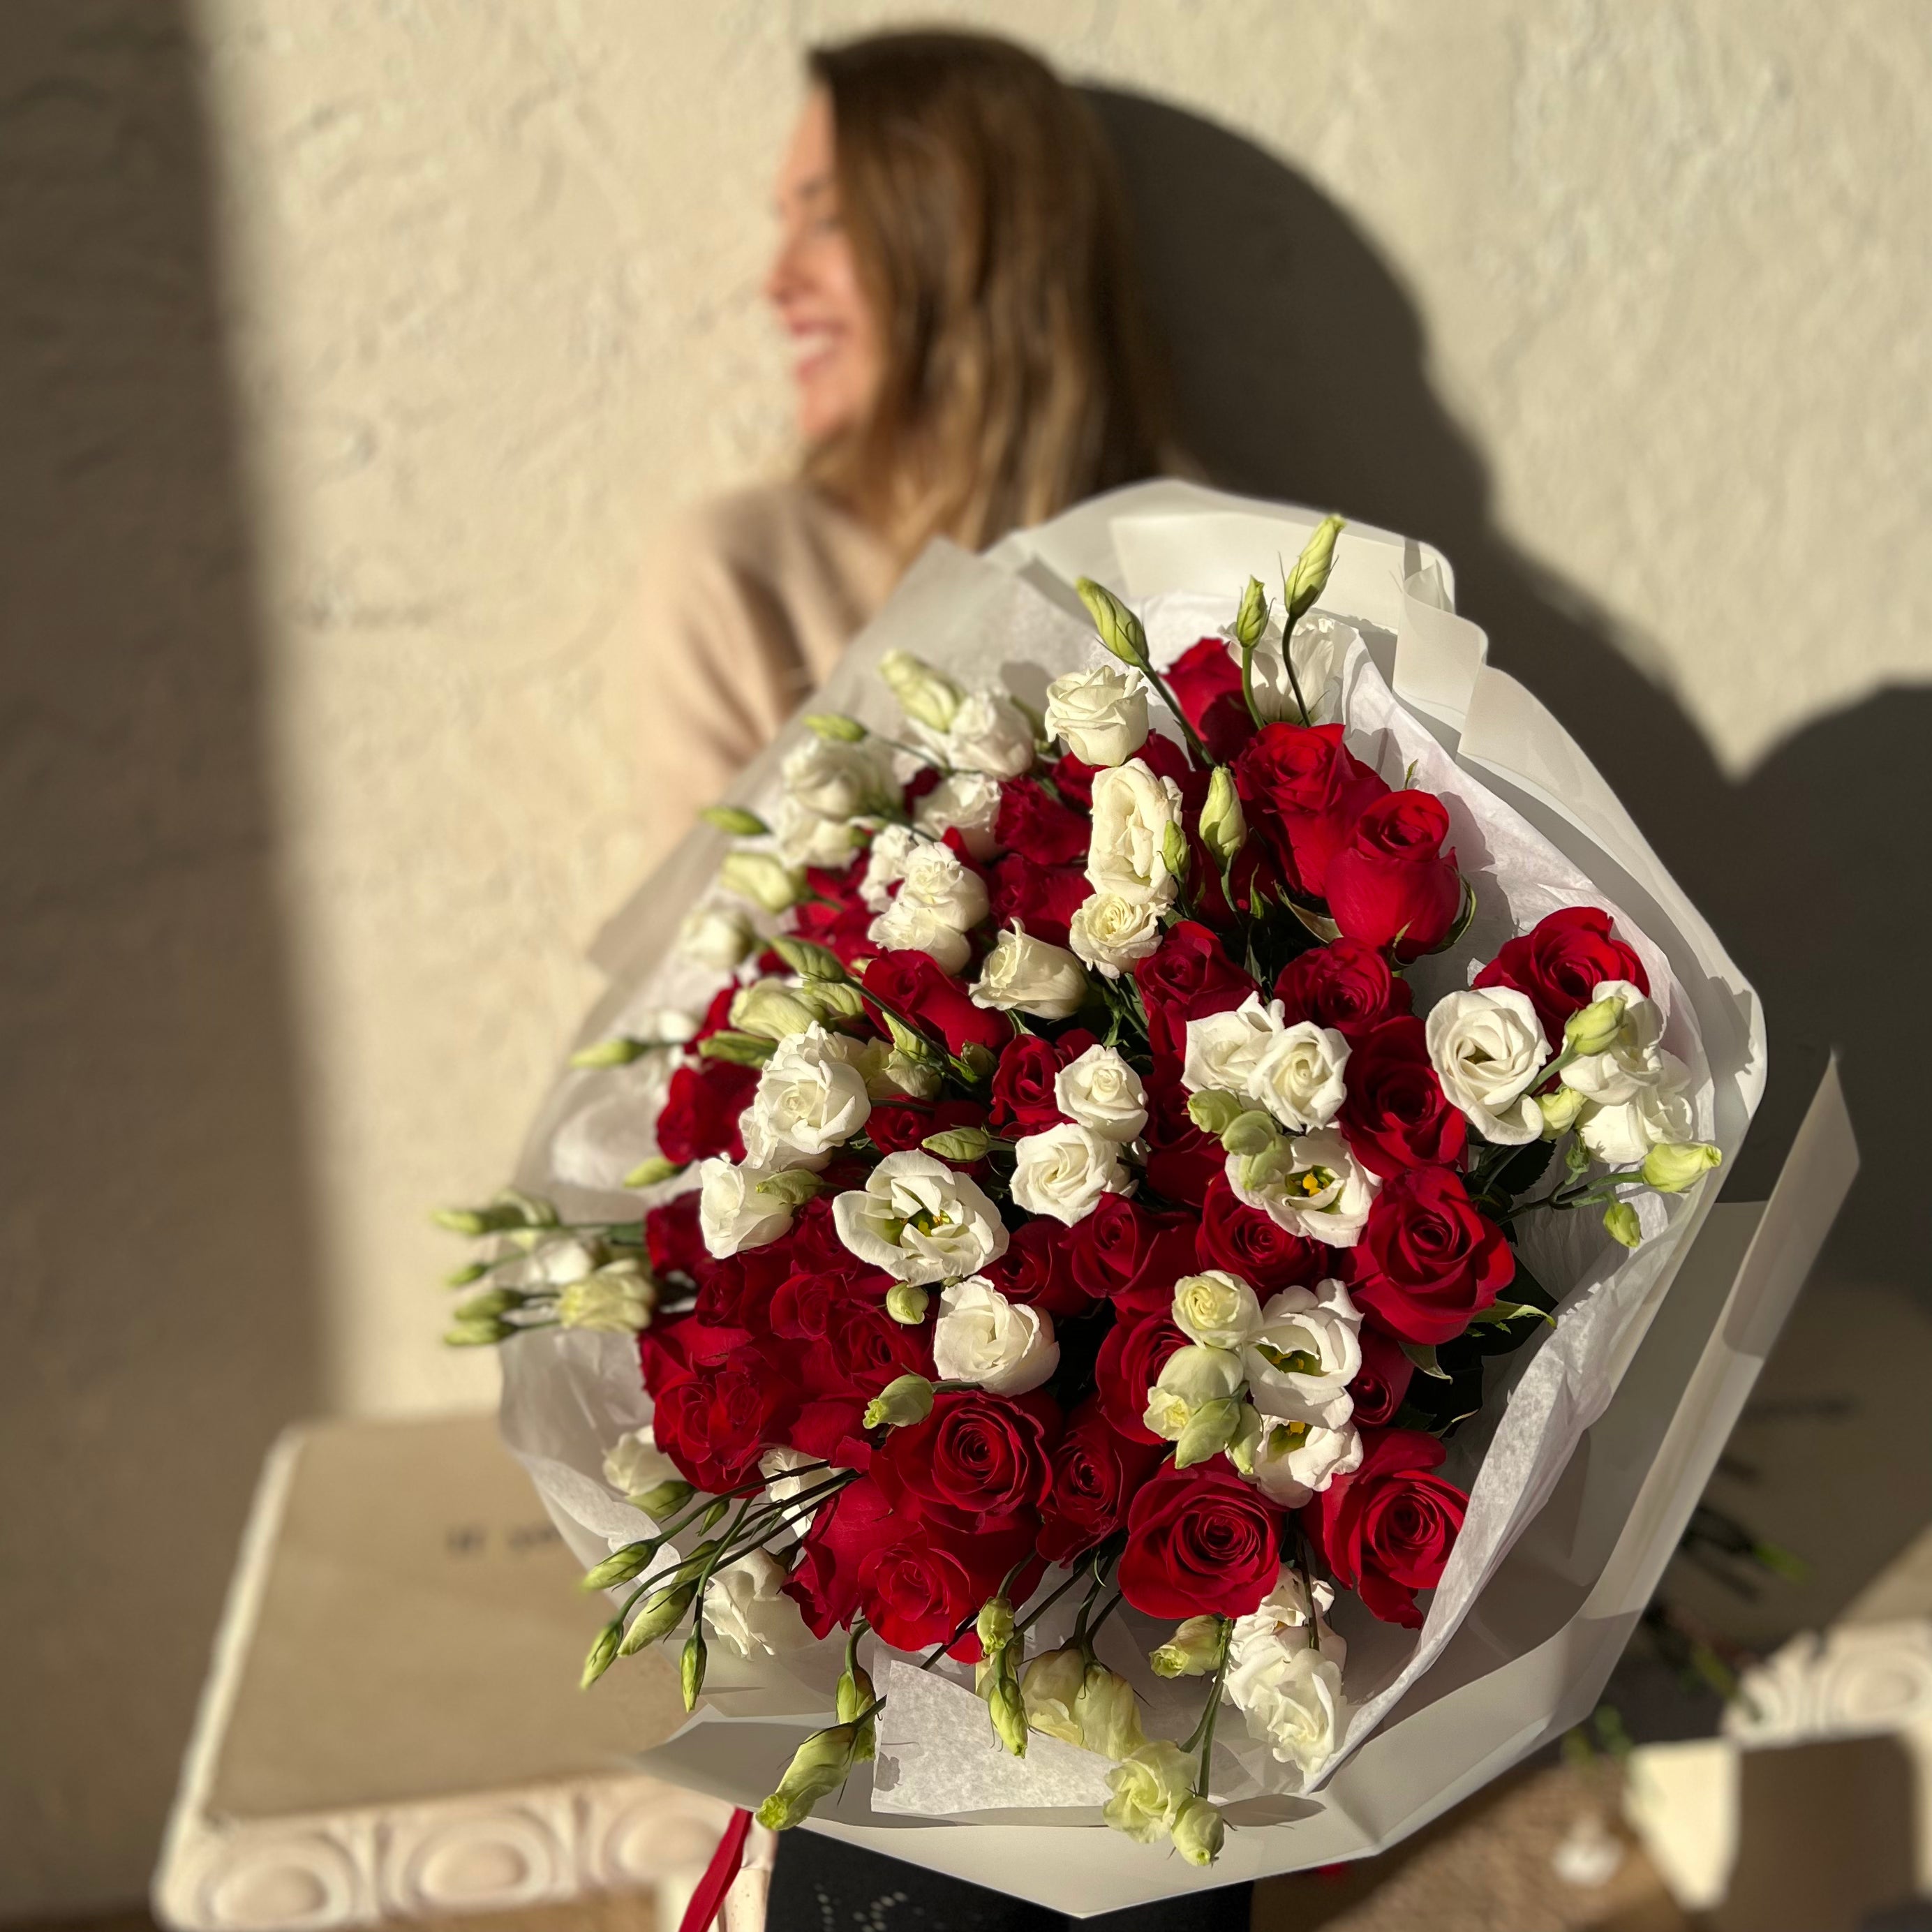 The Red Caprice flower bouquet